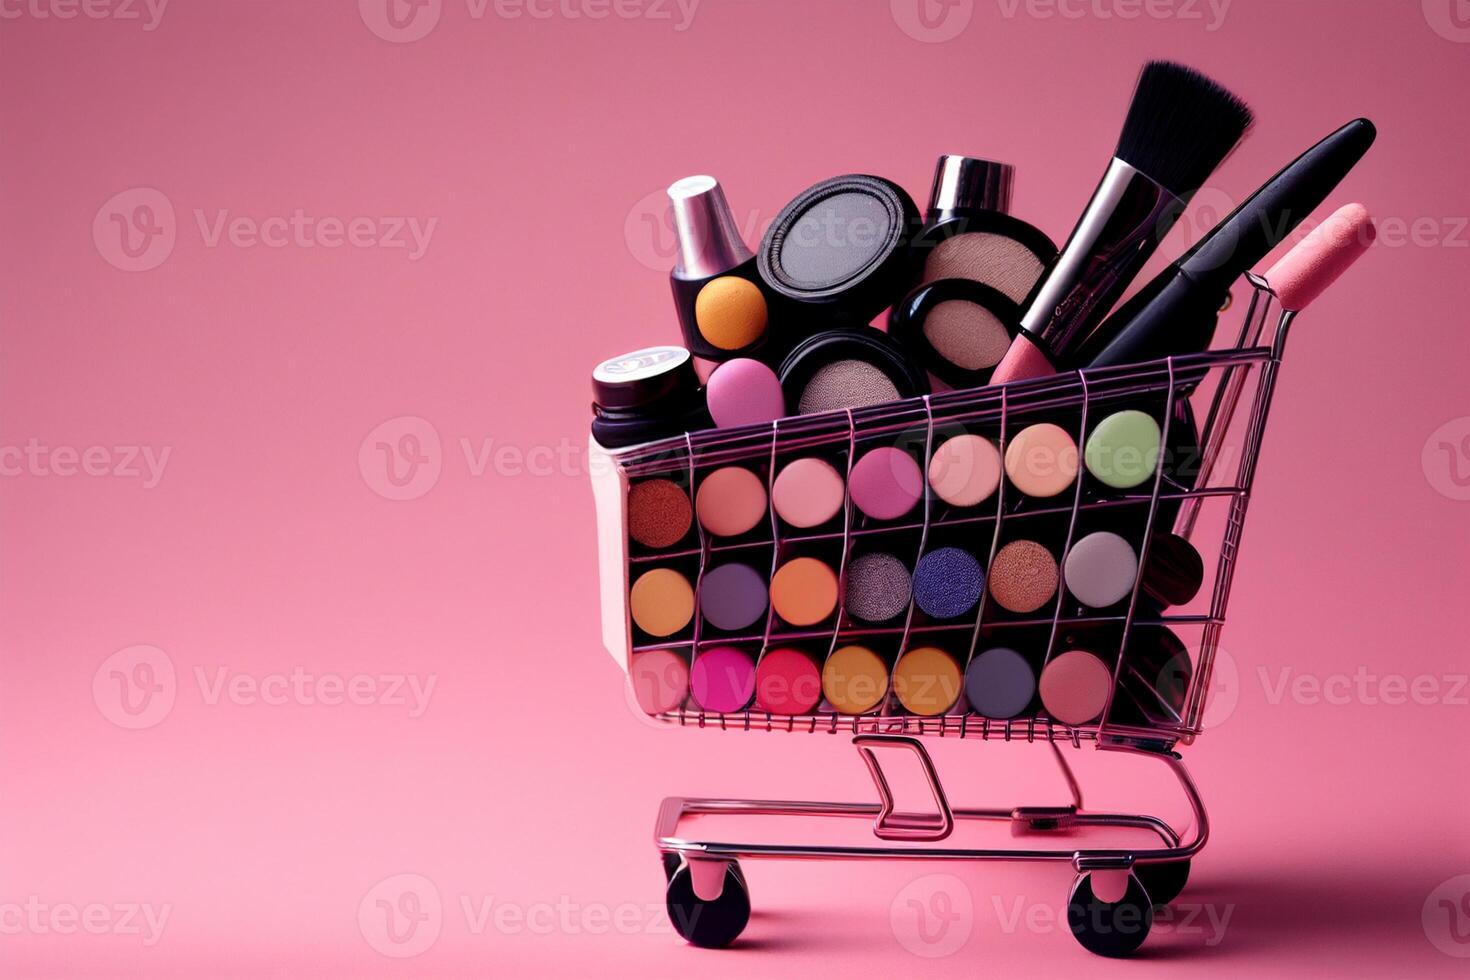 Shopping cart full of makeup products on pink background with copy space photo